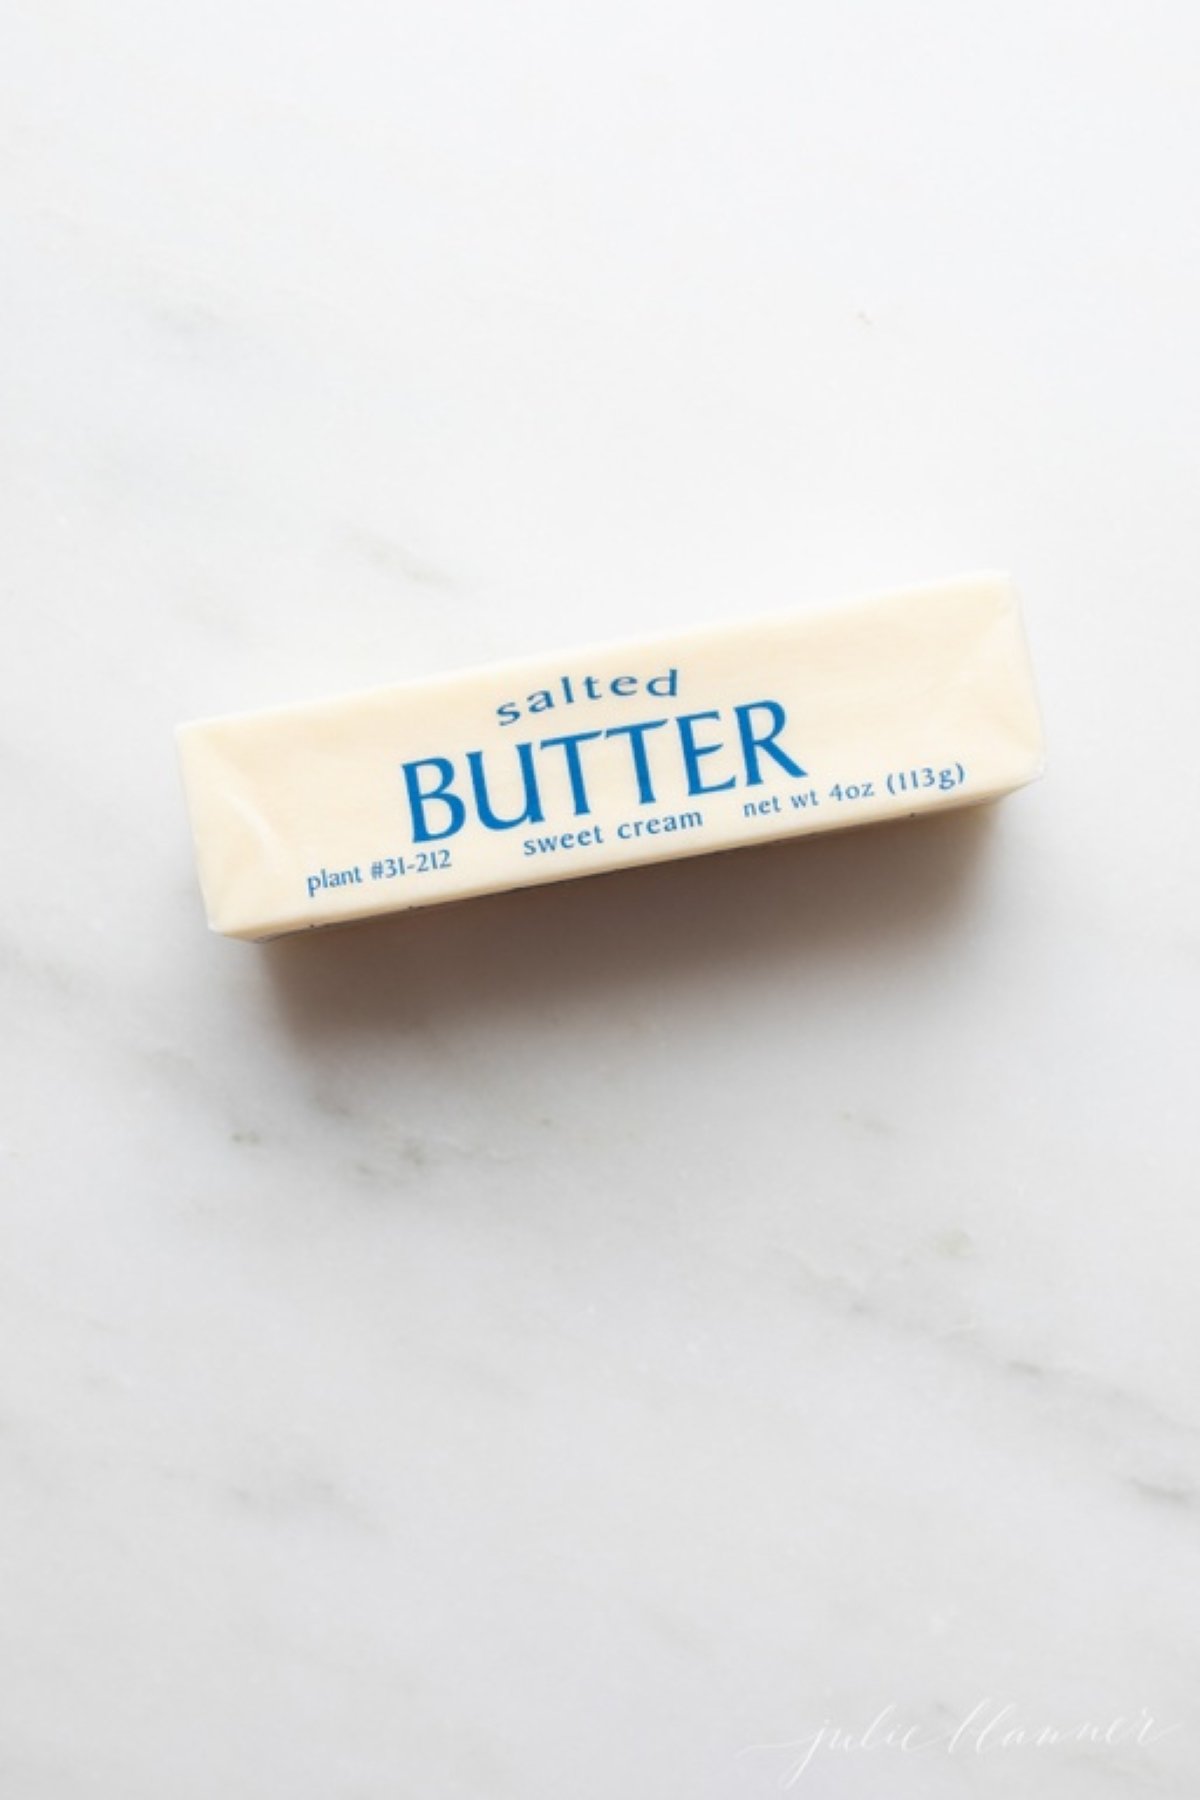 Learn How to Soften Butter Quickly